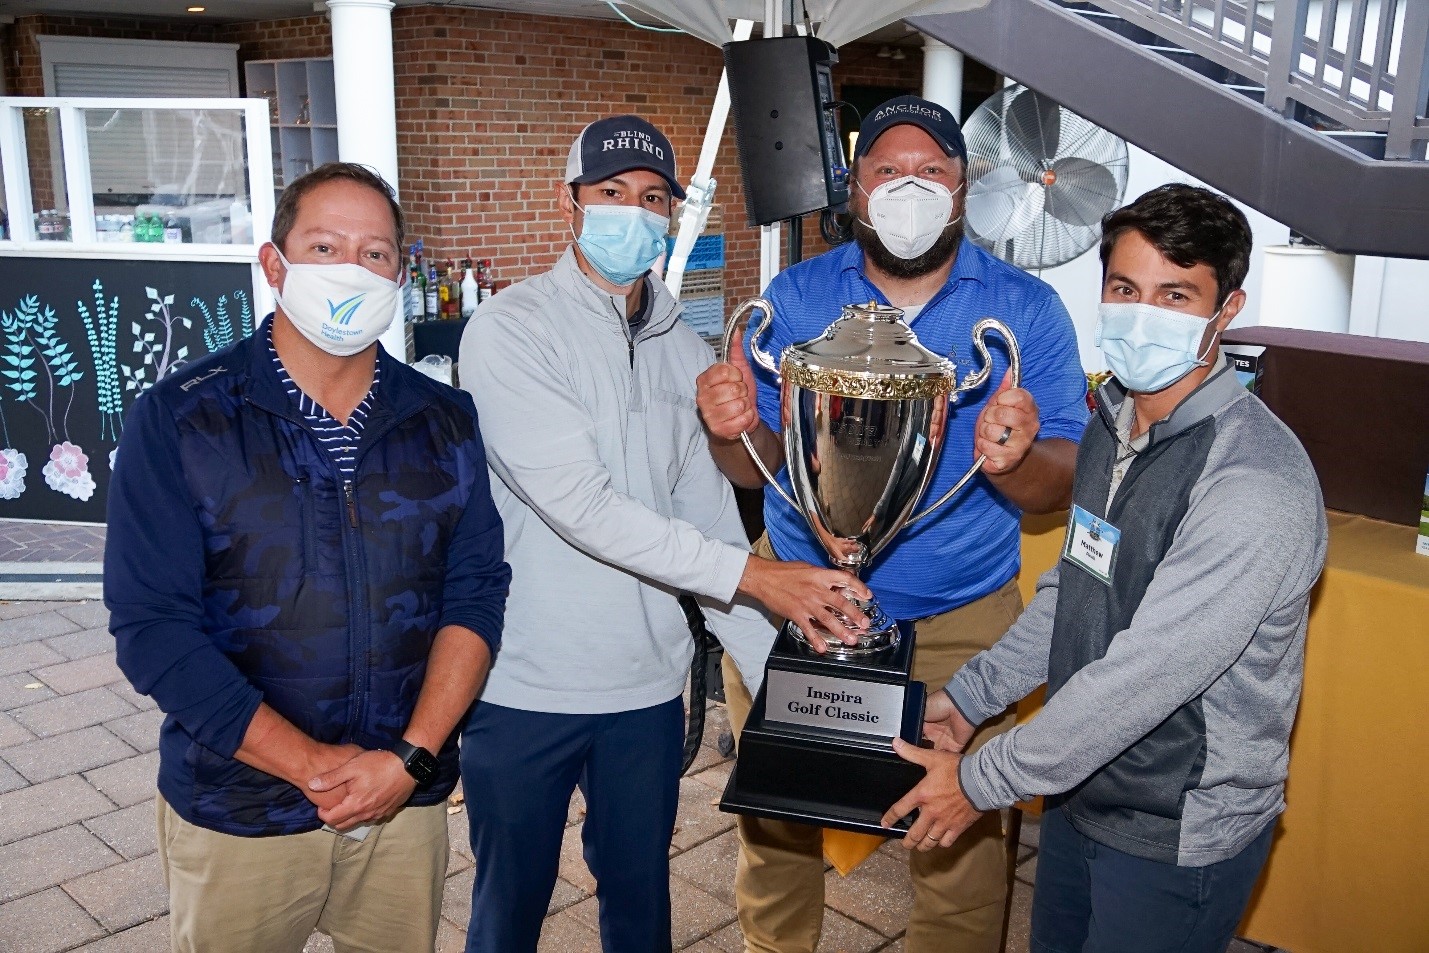 Group of men holding a trophy while wearing medical masks